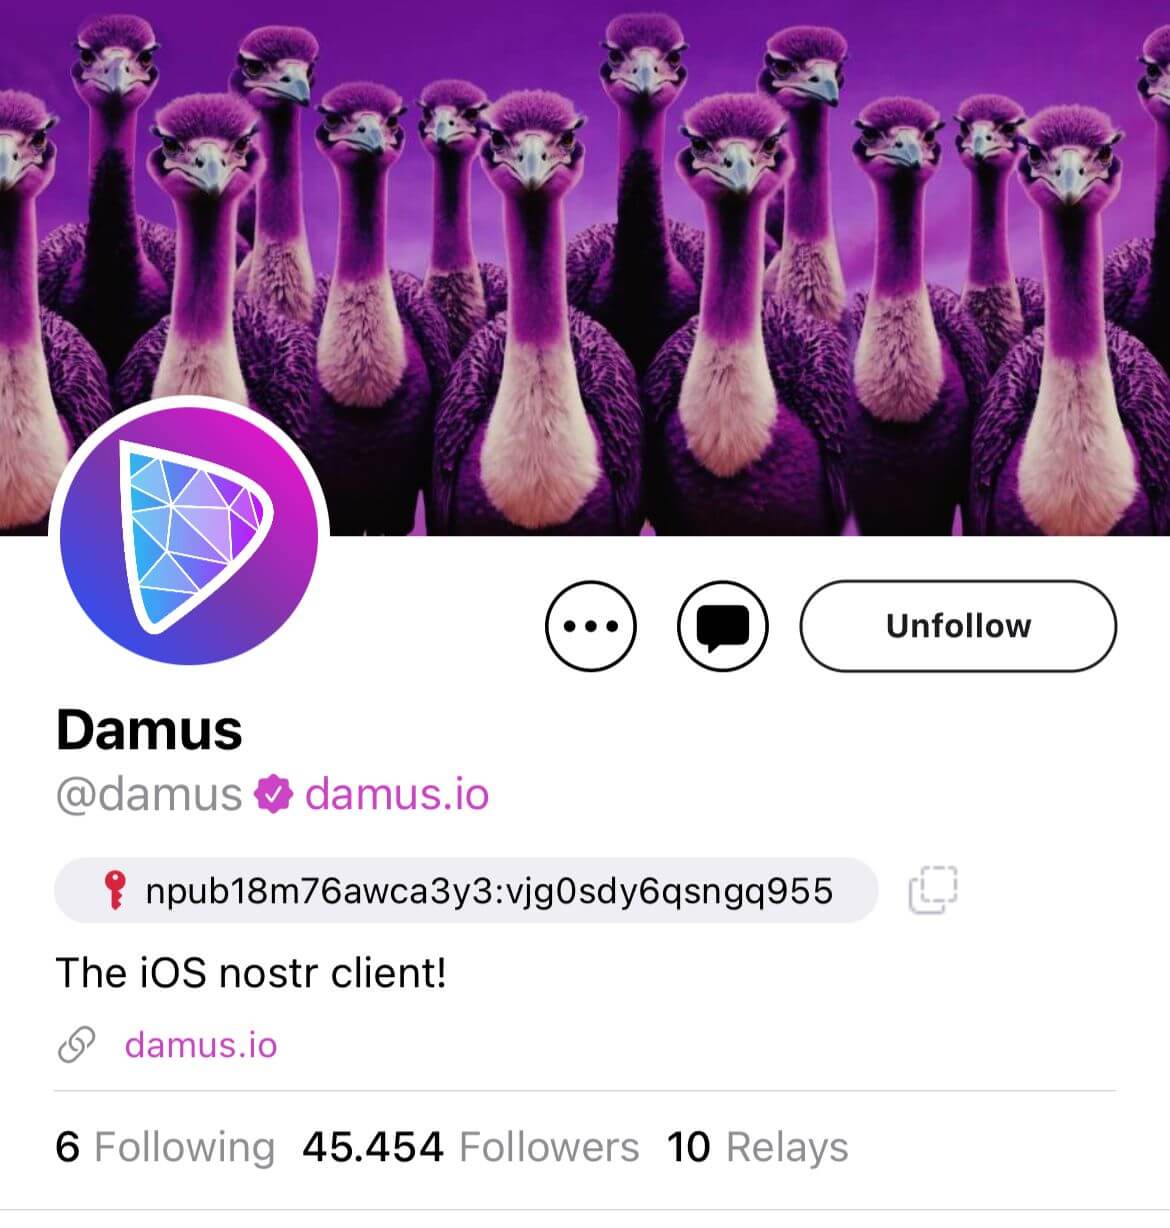 Damus app official page